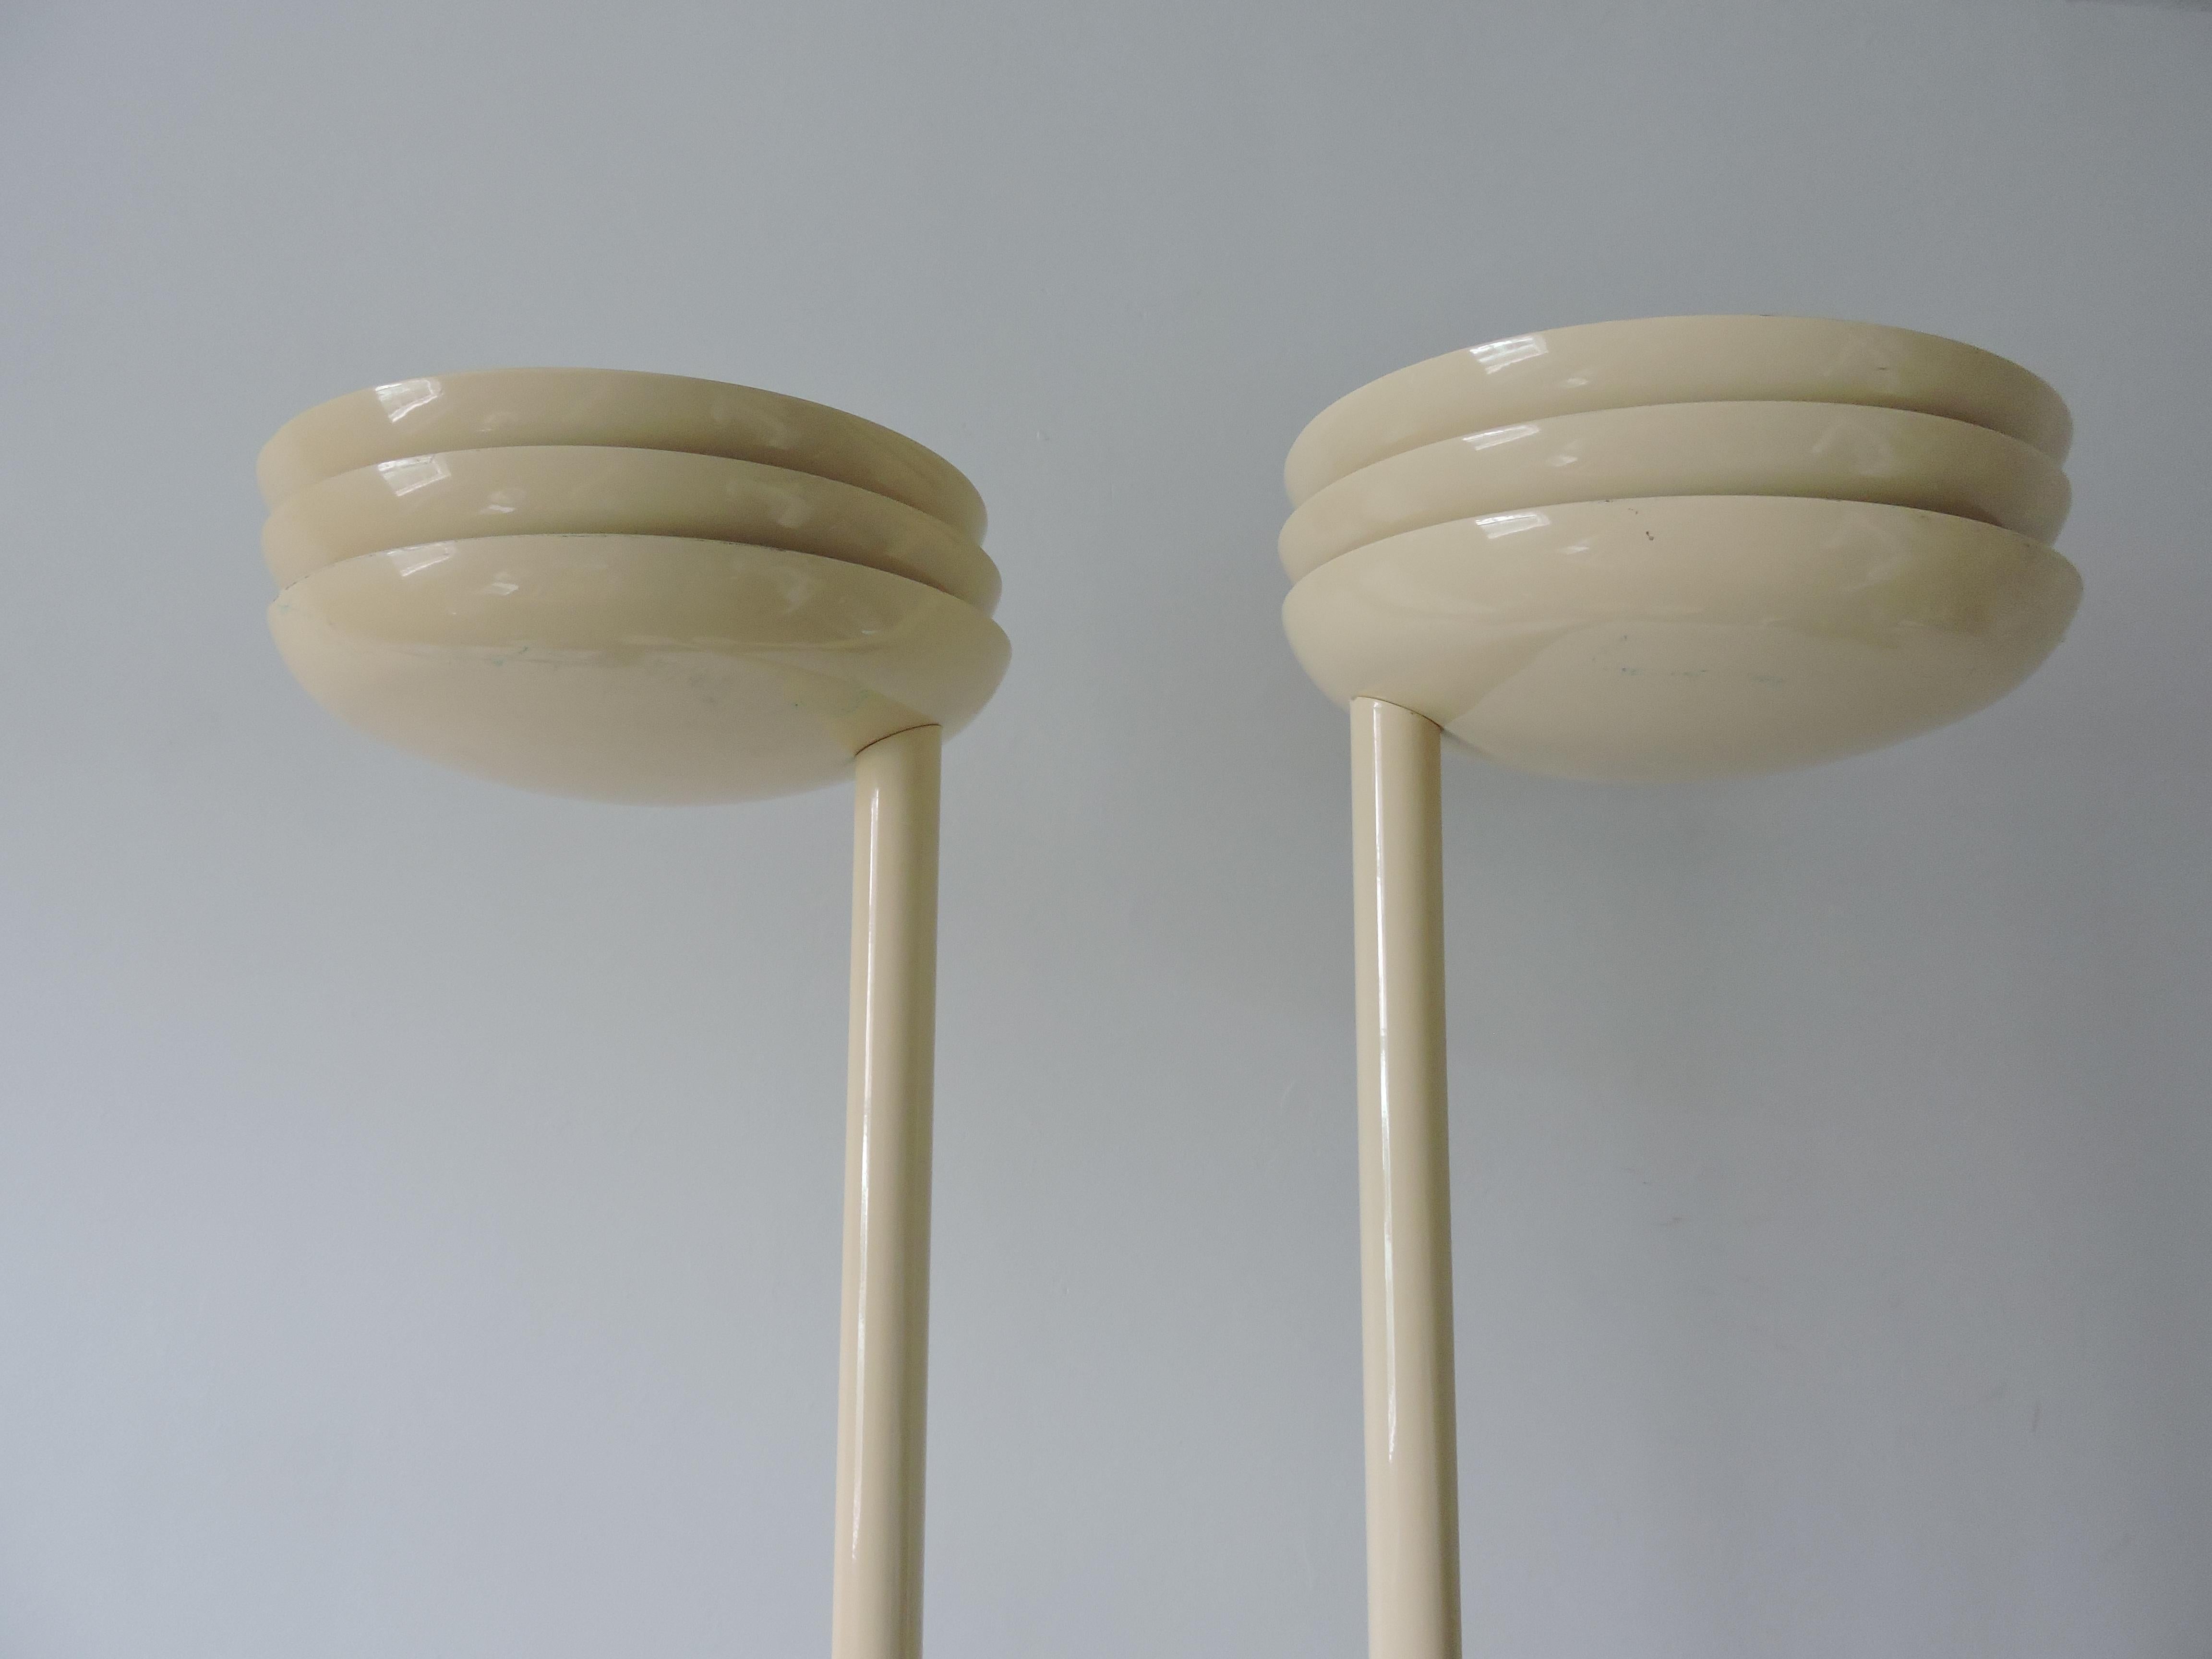 Late 20th Century Vintage Italian Cream Model Rl 101/5 Floor Lamps from Relux, Set of Two For Sale